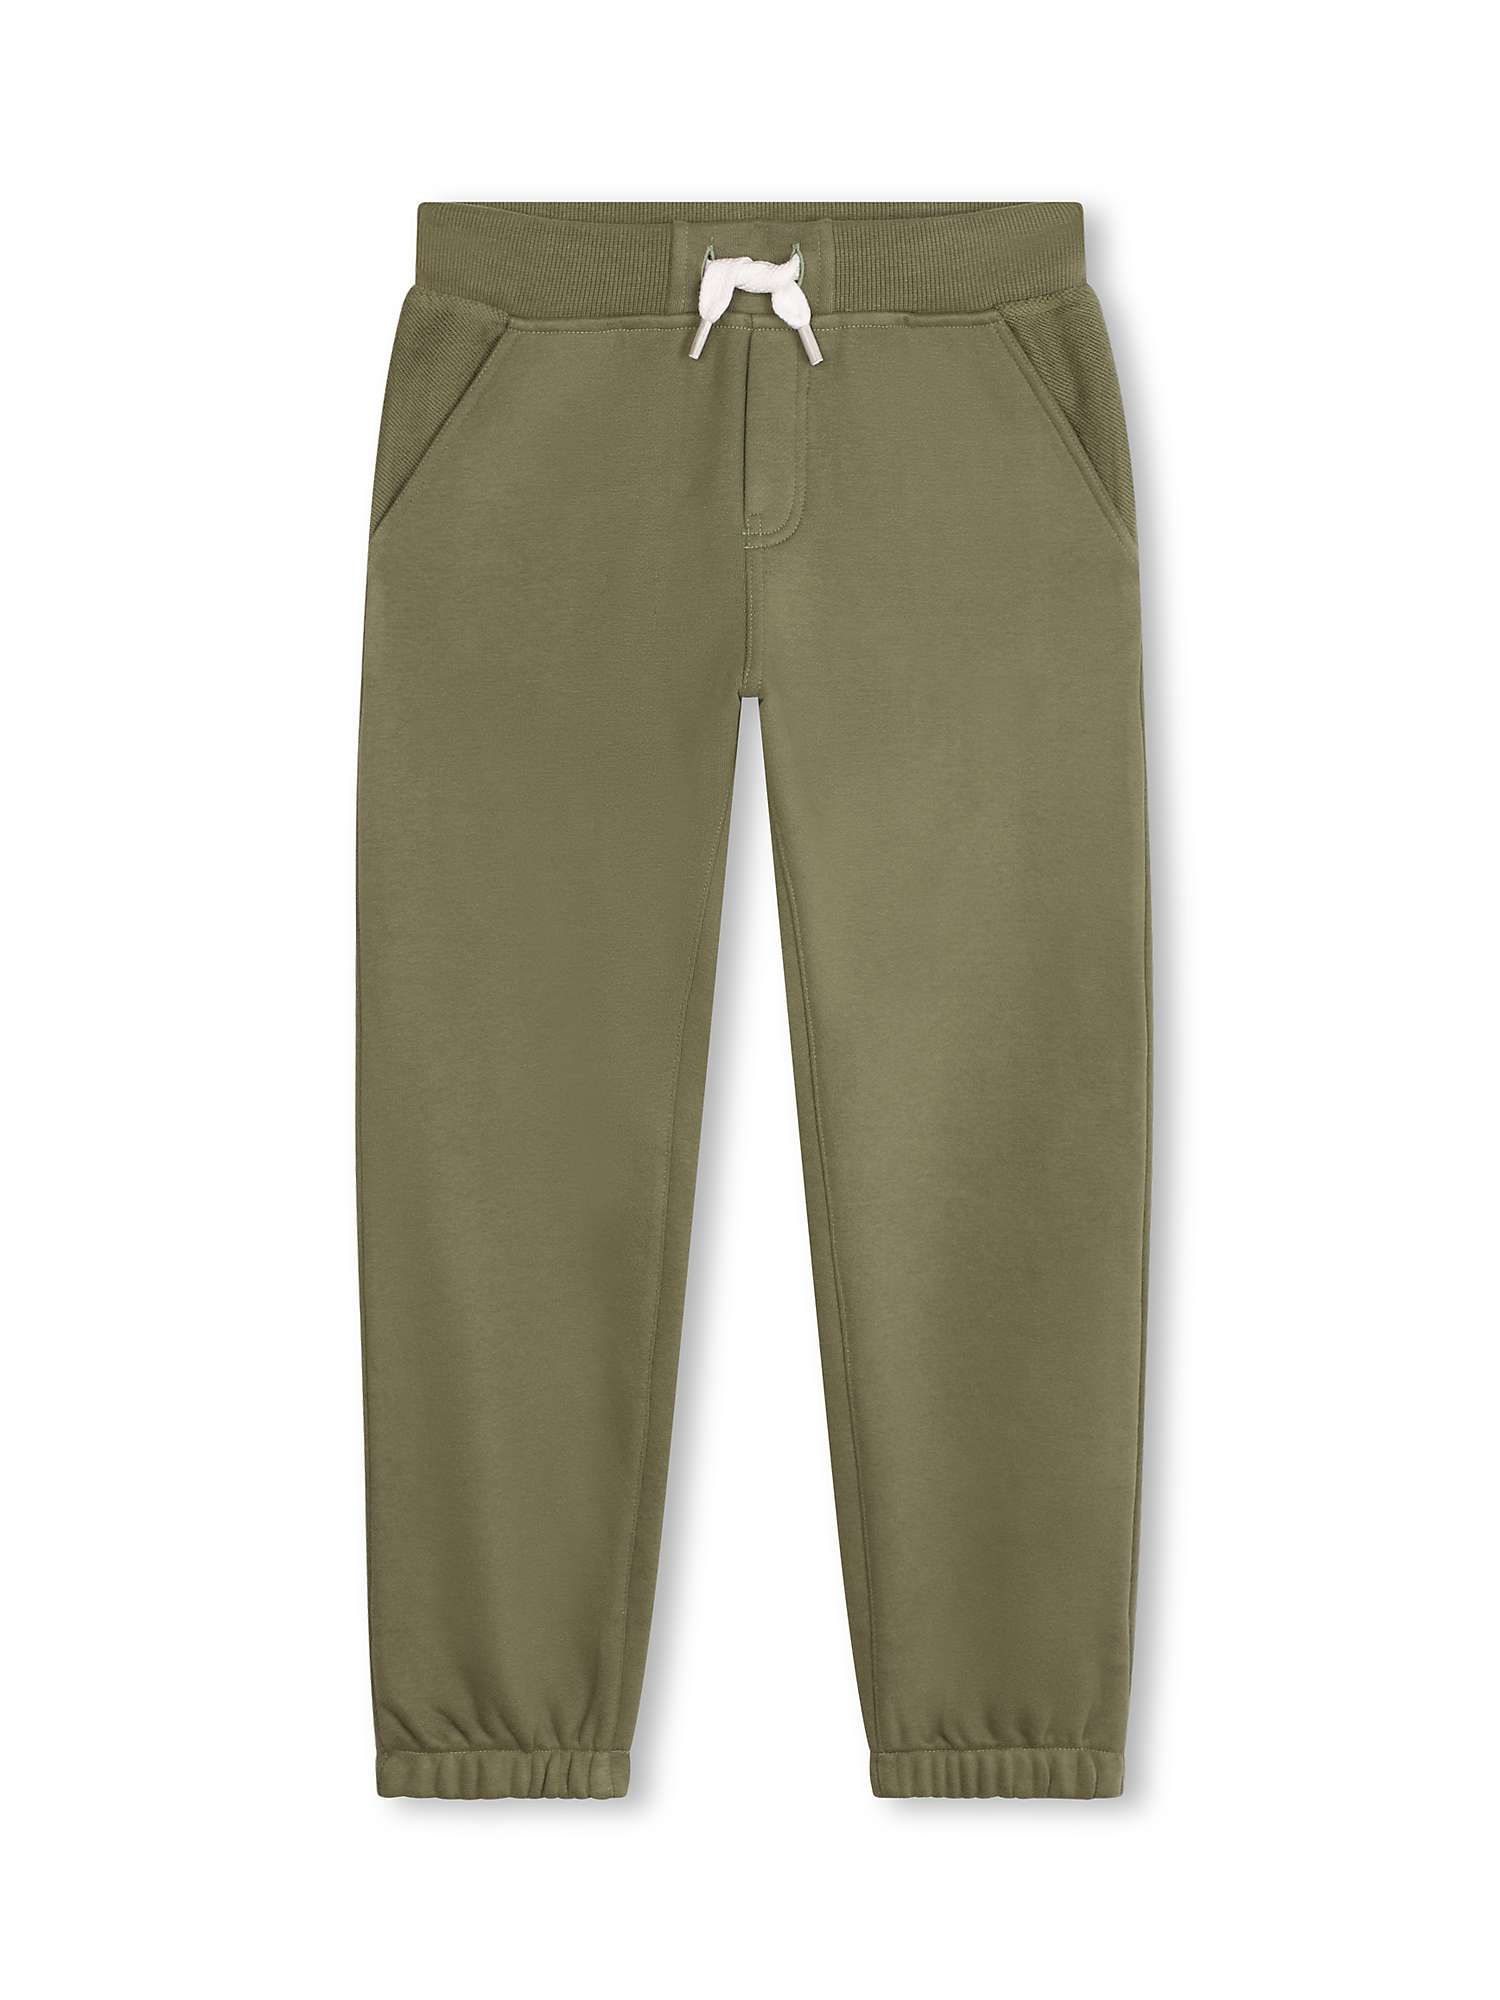 Buy Timberland Kids' French Terry Loose Fit Jogging Bottoms, Green Online at johnlewis.com